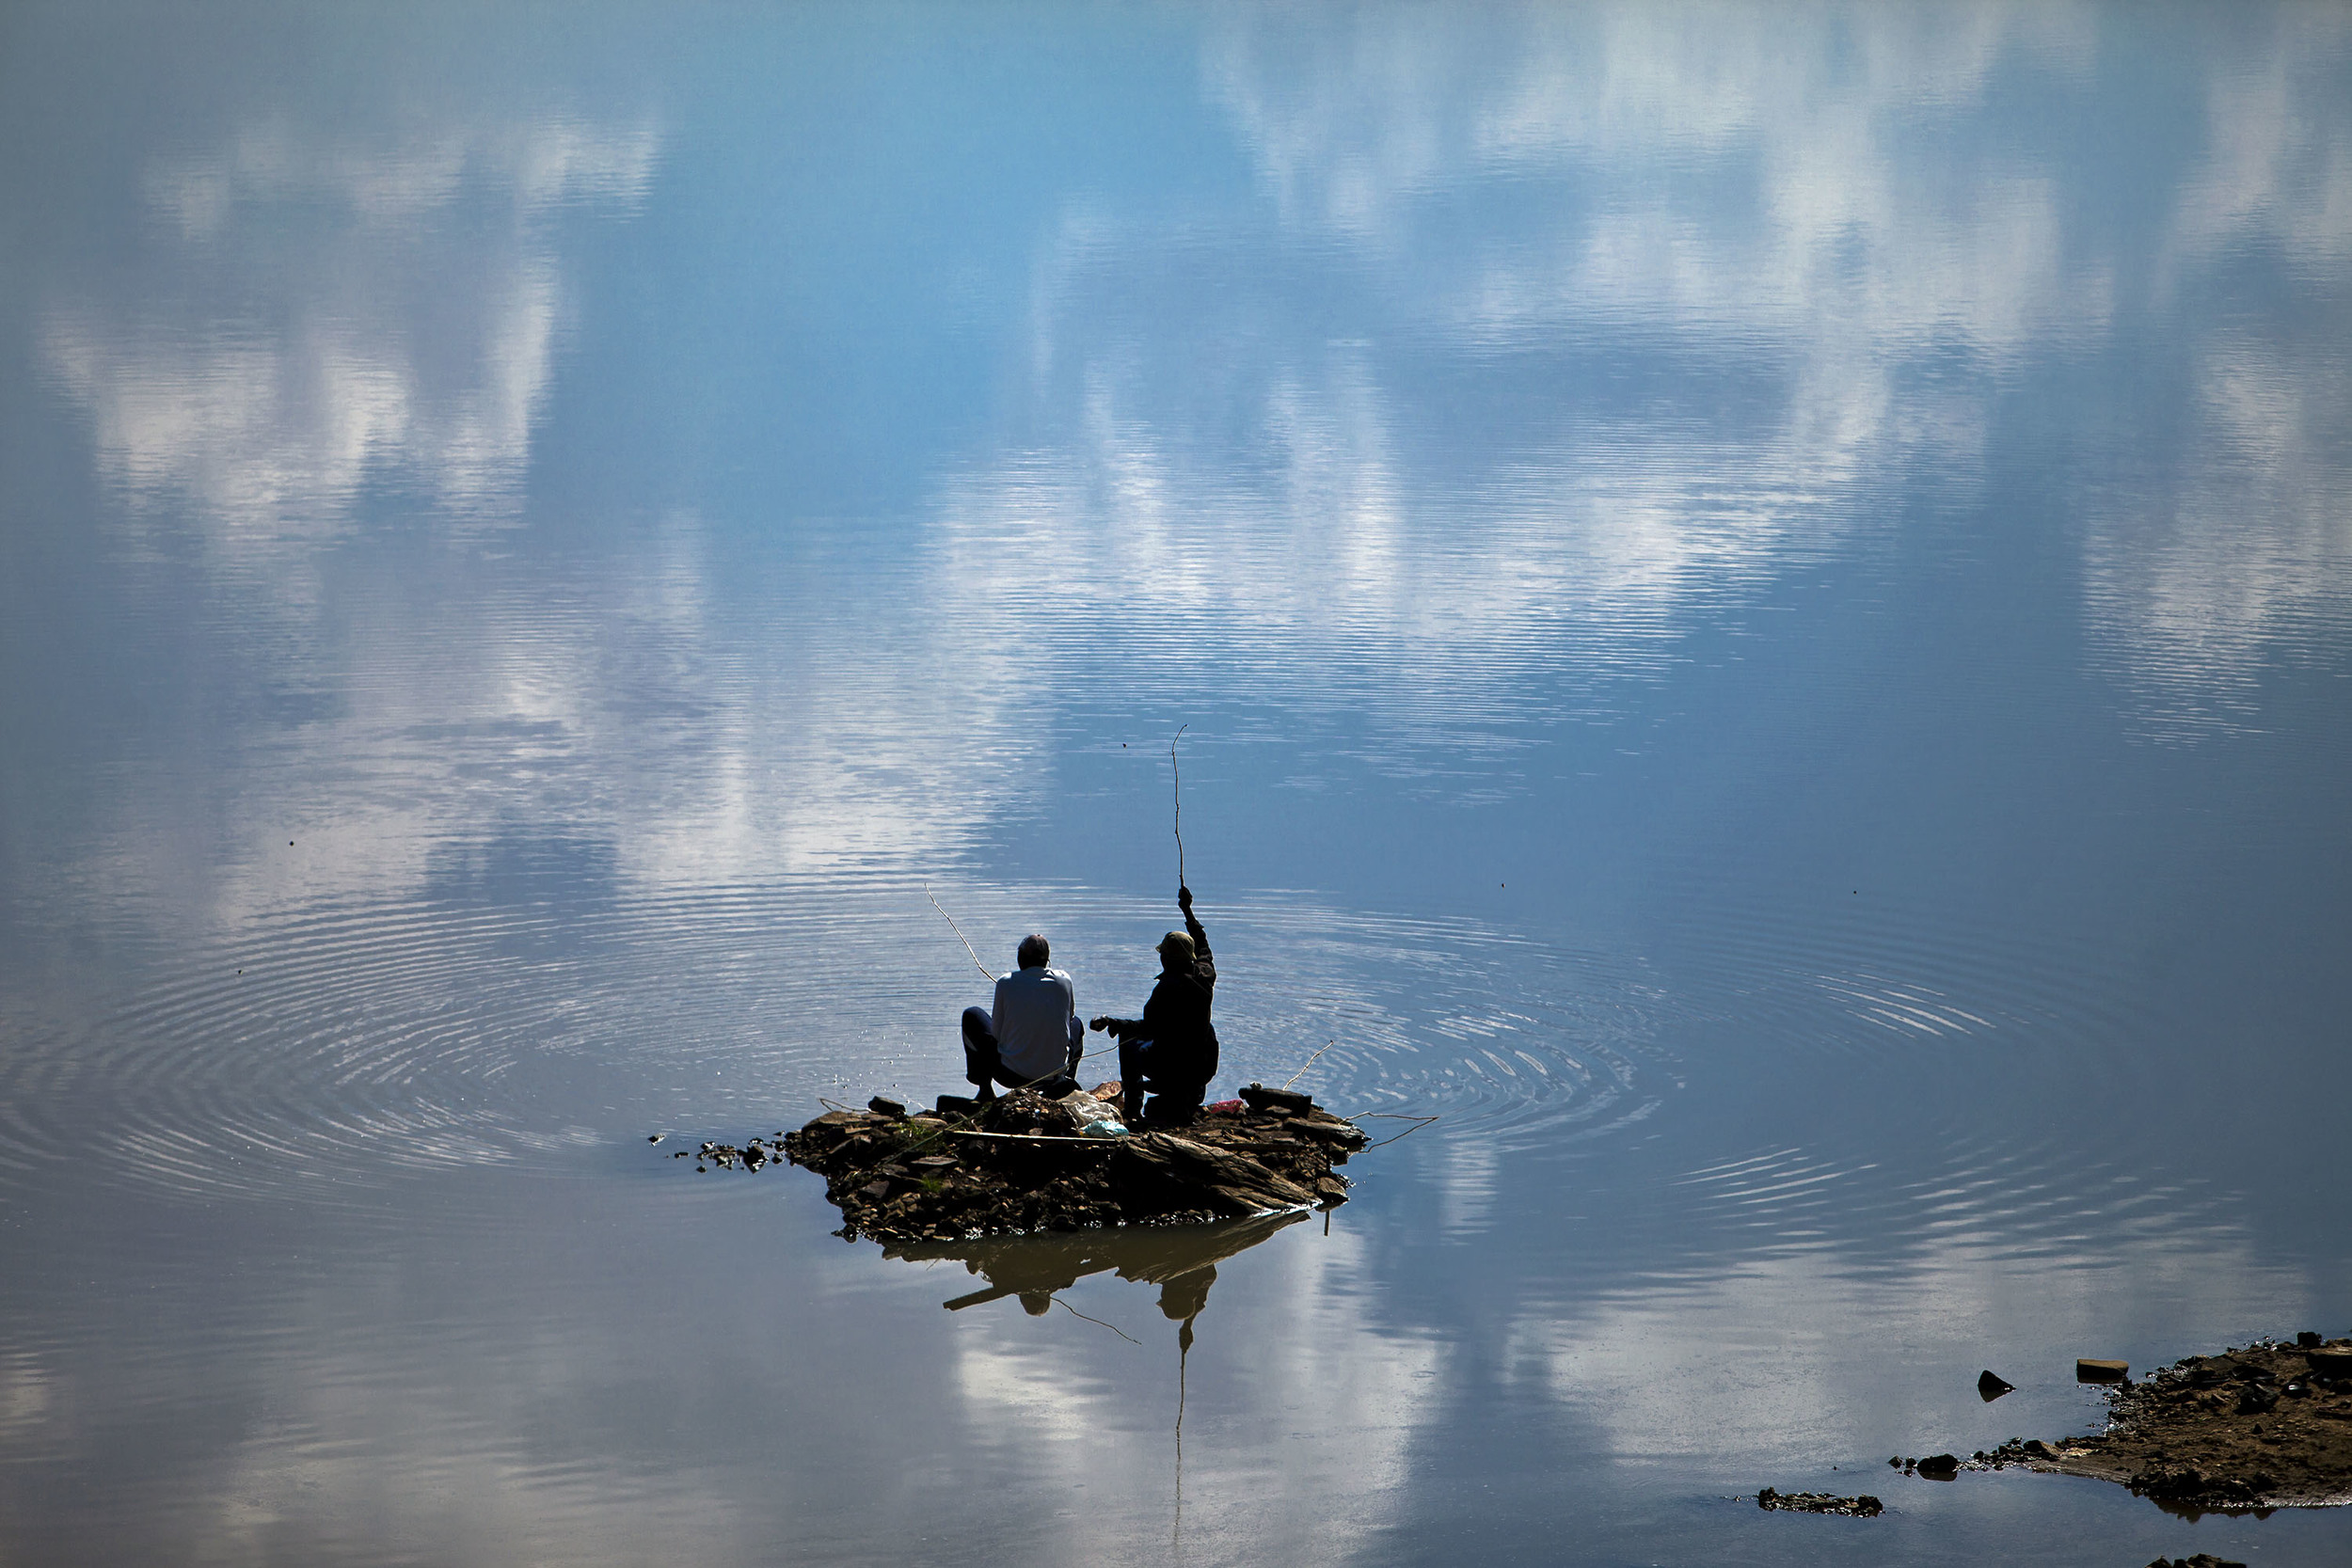 Fishermen at a lake in Limpopo, South Africa.